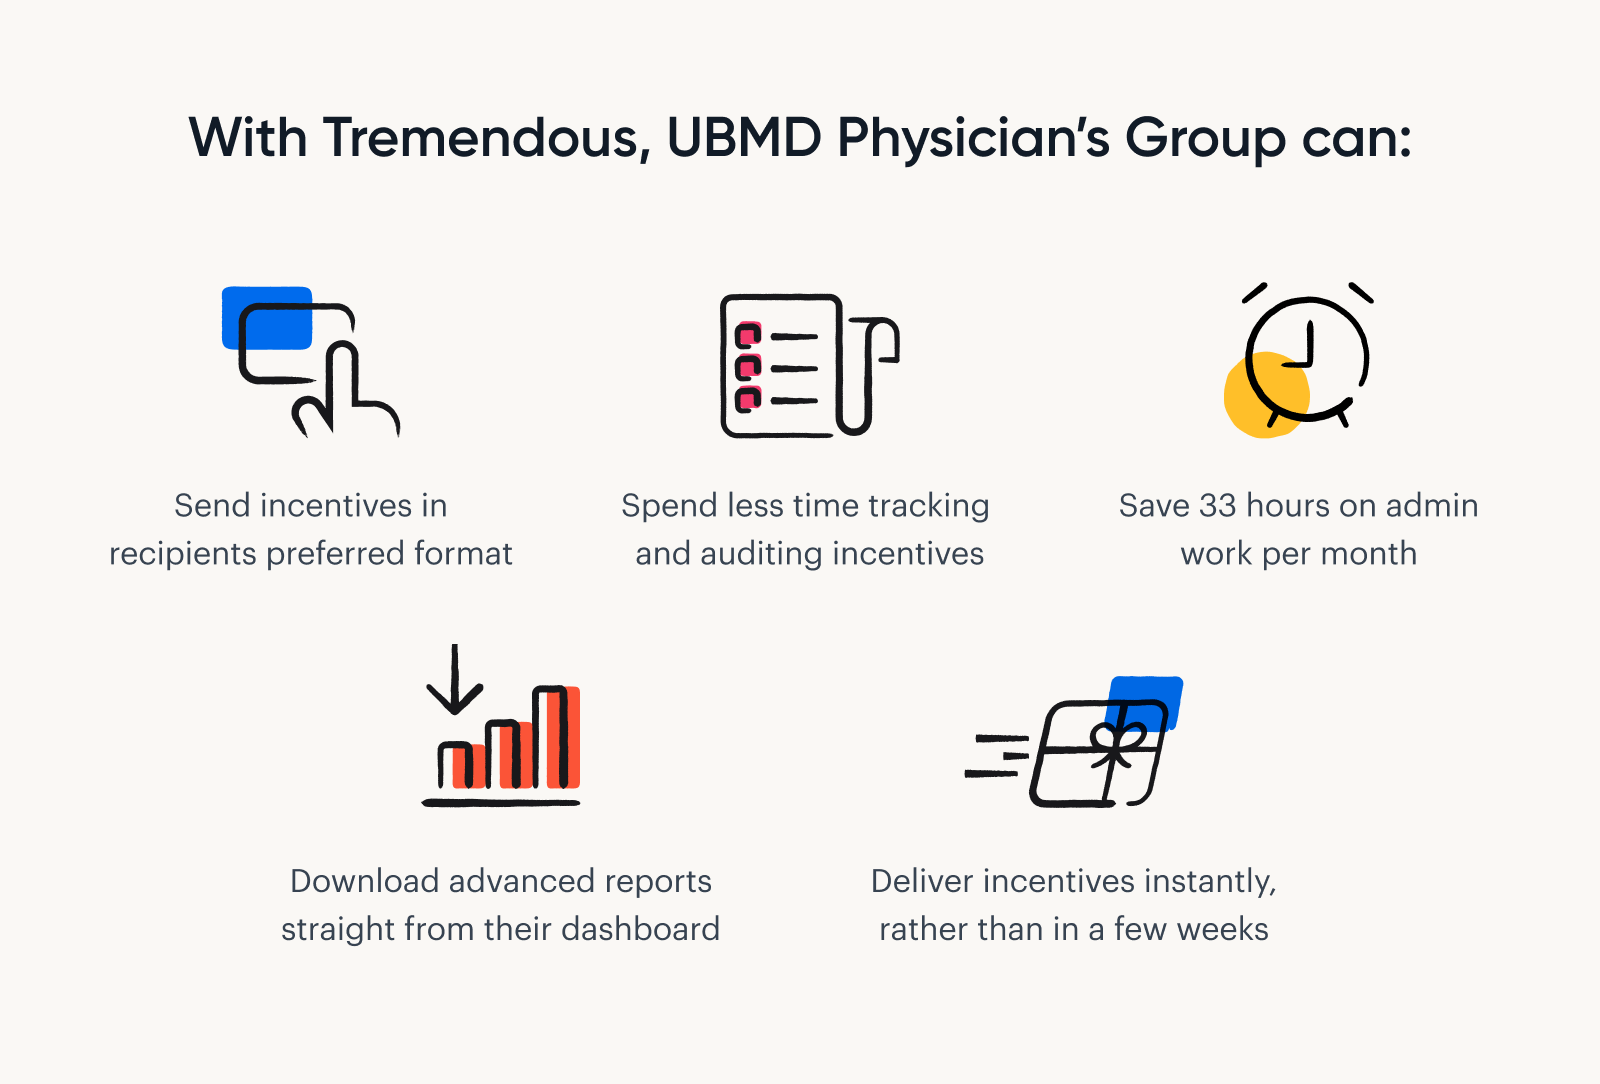 An image explaining how implementing Tremendous helped UBMD Physician's Group streamline incentives, save 33 hours per month, download advanced reports, and deliver incentives instantly, rather than in a few weeks.